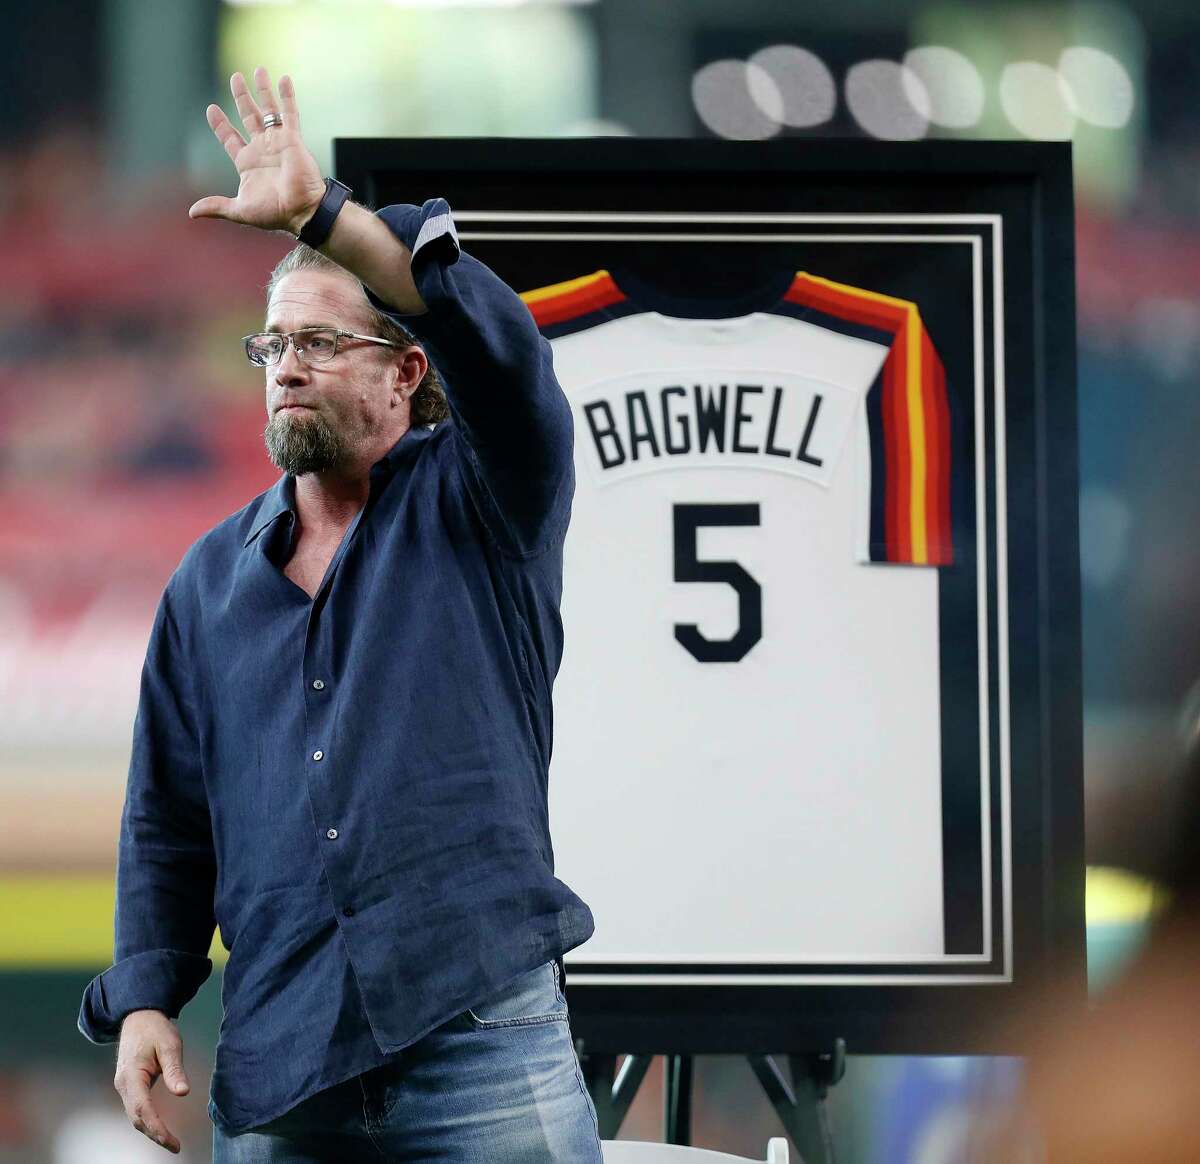 Jeff Bagwell waves to fans during a ceremony to honor his recent induction into the National Baseball Hall of Fame before the start of an MLB game at Minute Maid Park, Saturday, Aug. 5, 2017, in Houston.